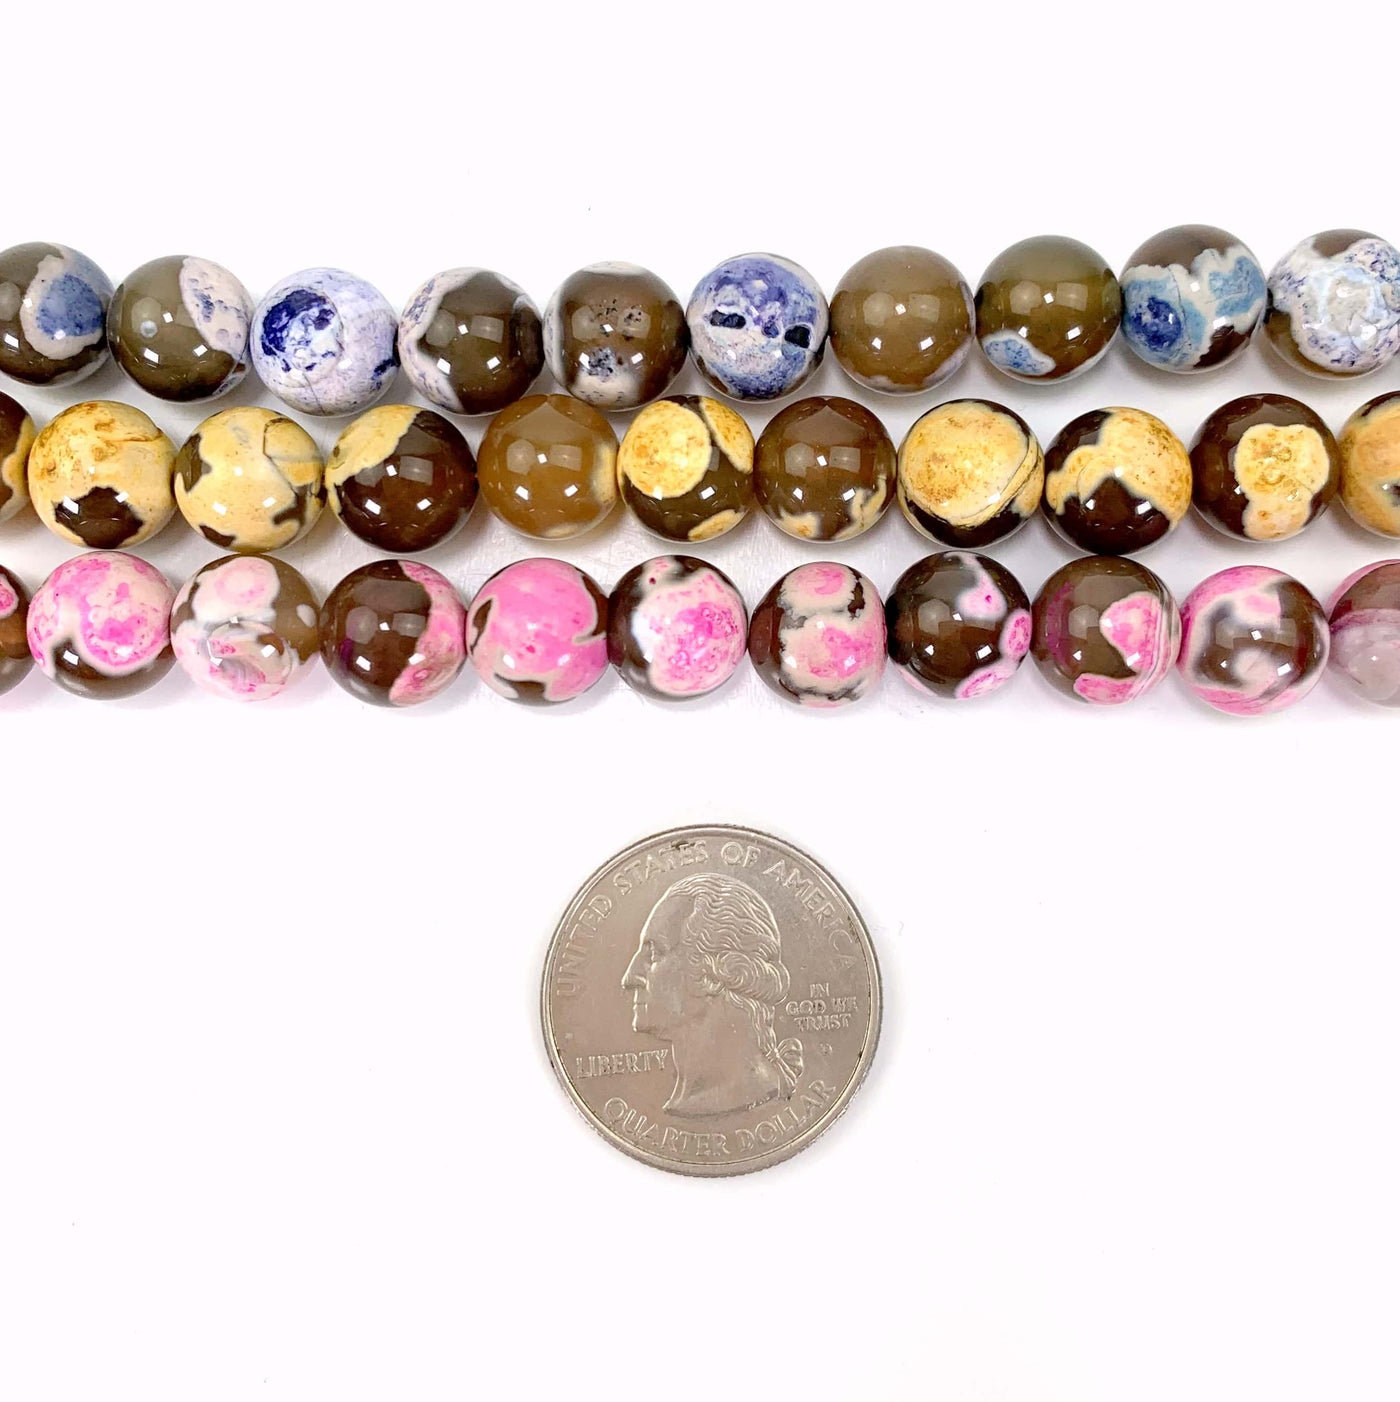 all 3 variations of dyed agate beads on a white background with a quarter next to them